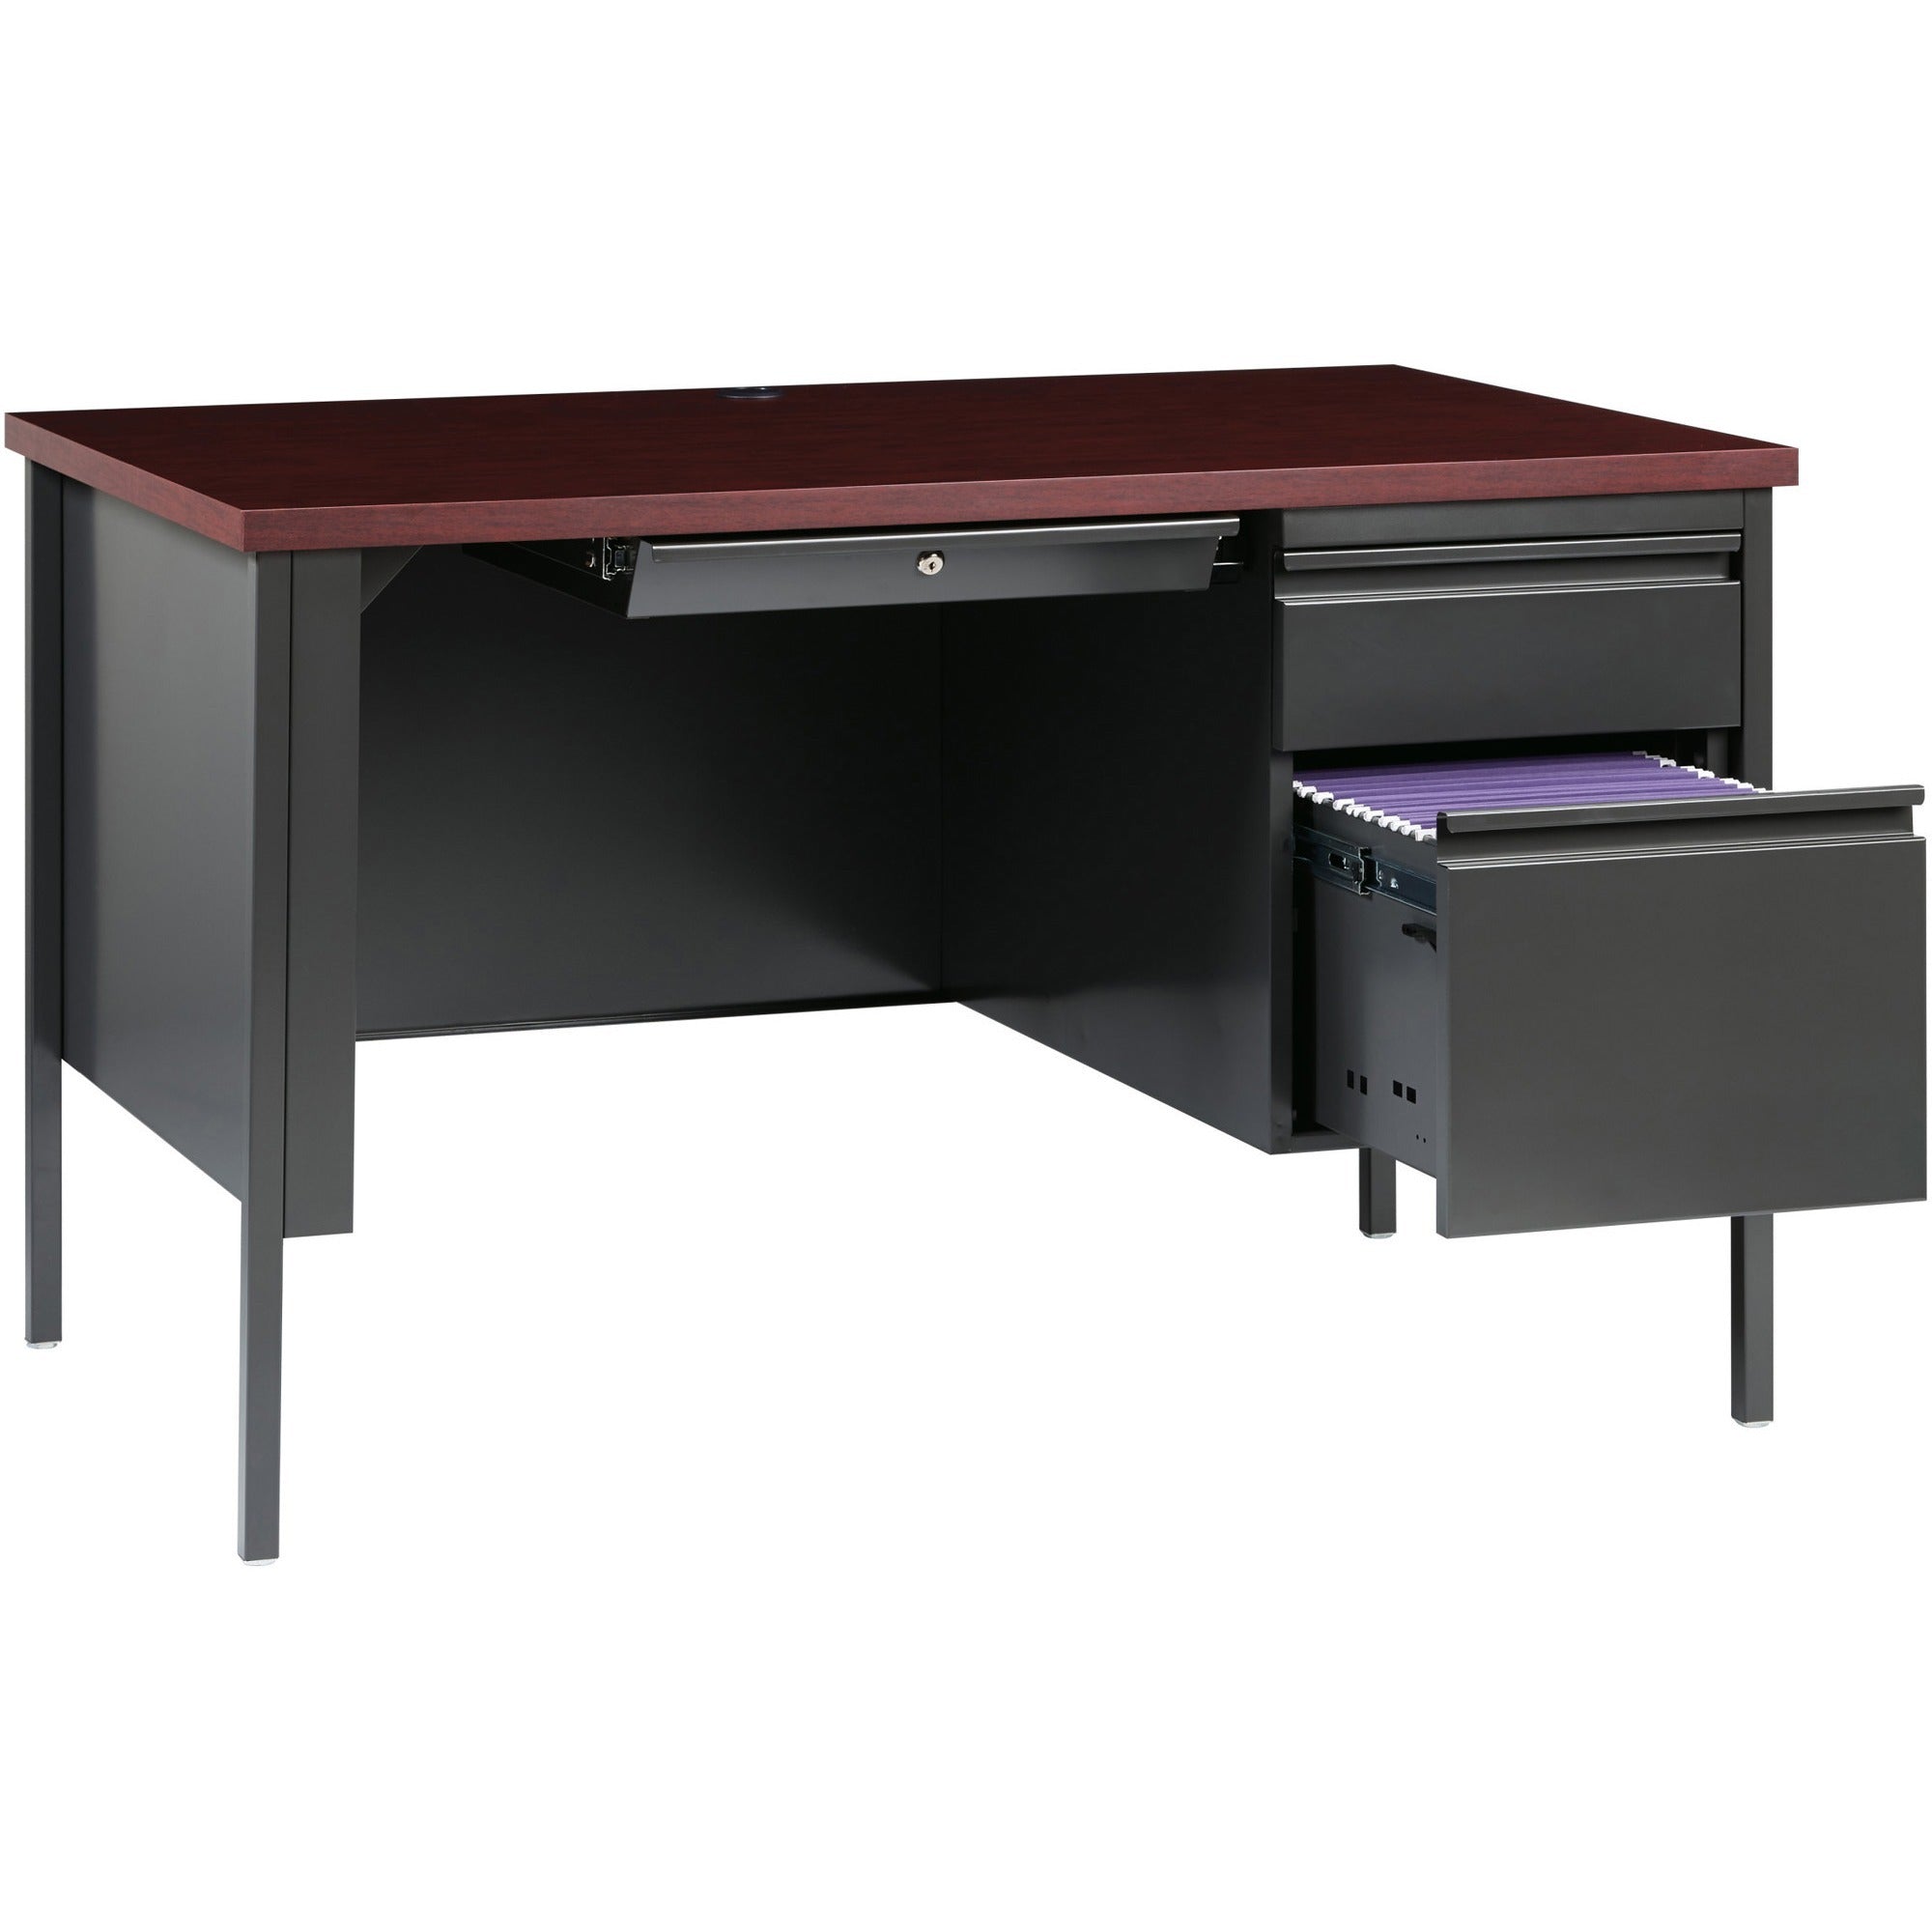 lorell-fortress-series-48-right-single-pedestal-desk-for-table-toplaminated-rectangle-mahogany-top-30-table-top-length-x-48-table-top-width-x-113-table-top-thickness-2950-height-assembly-required-mahogany-steel-1-each_llr66903 - 4